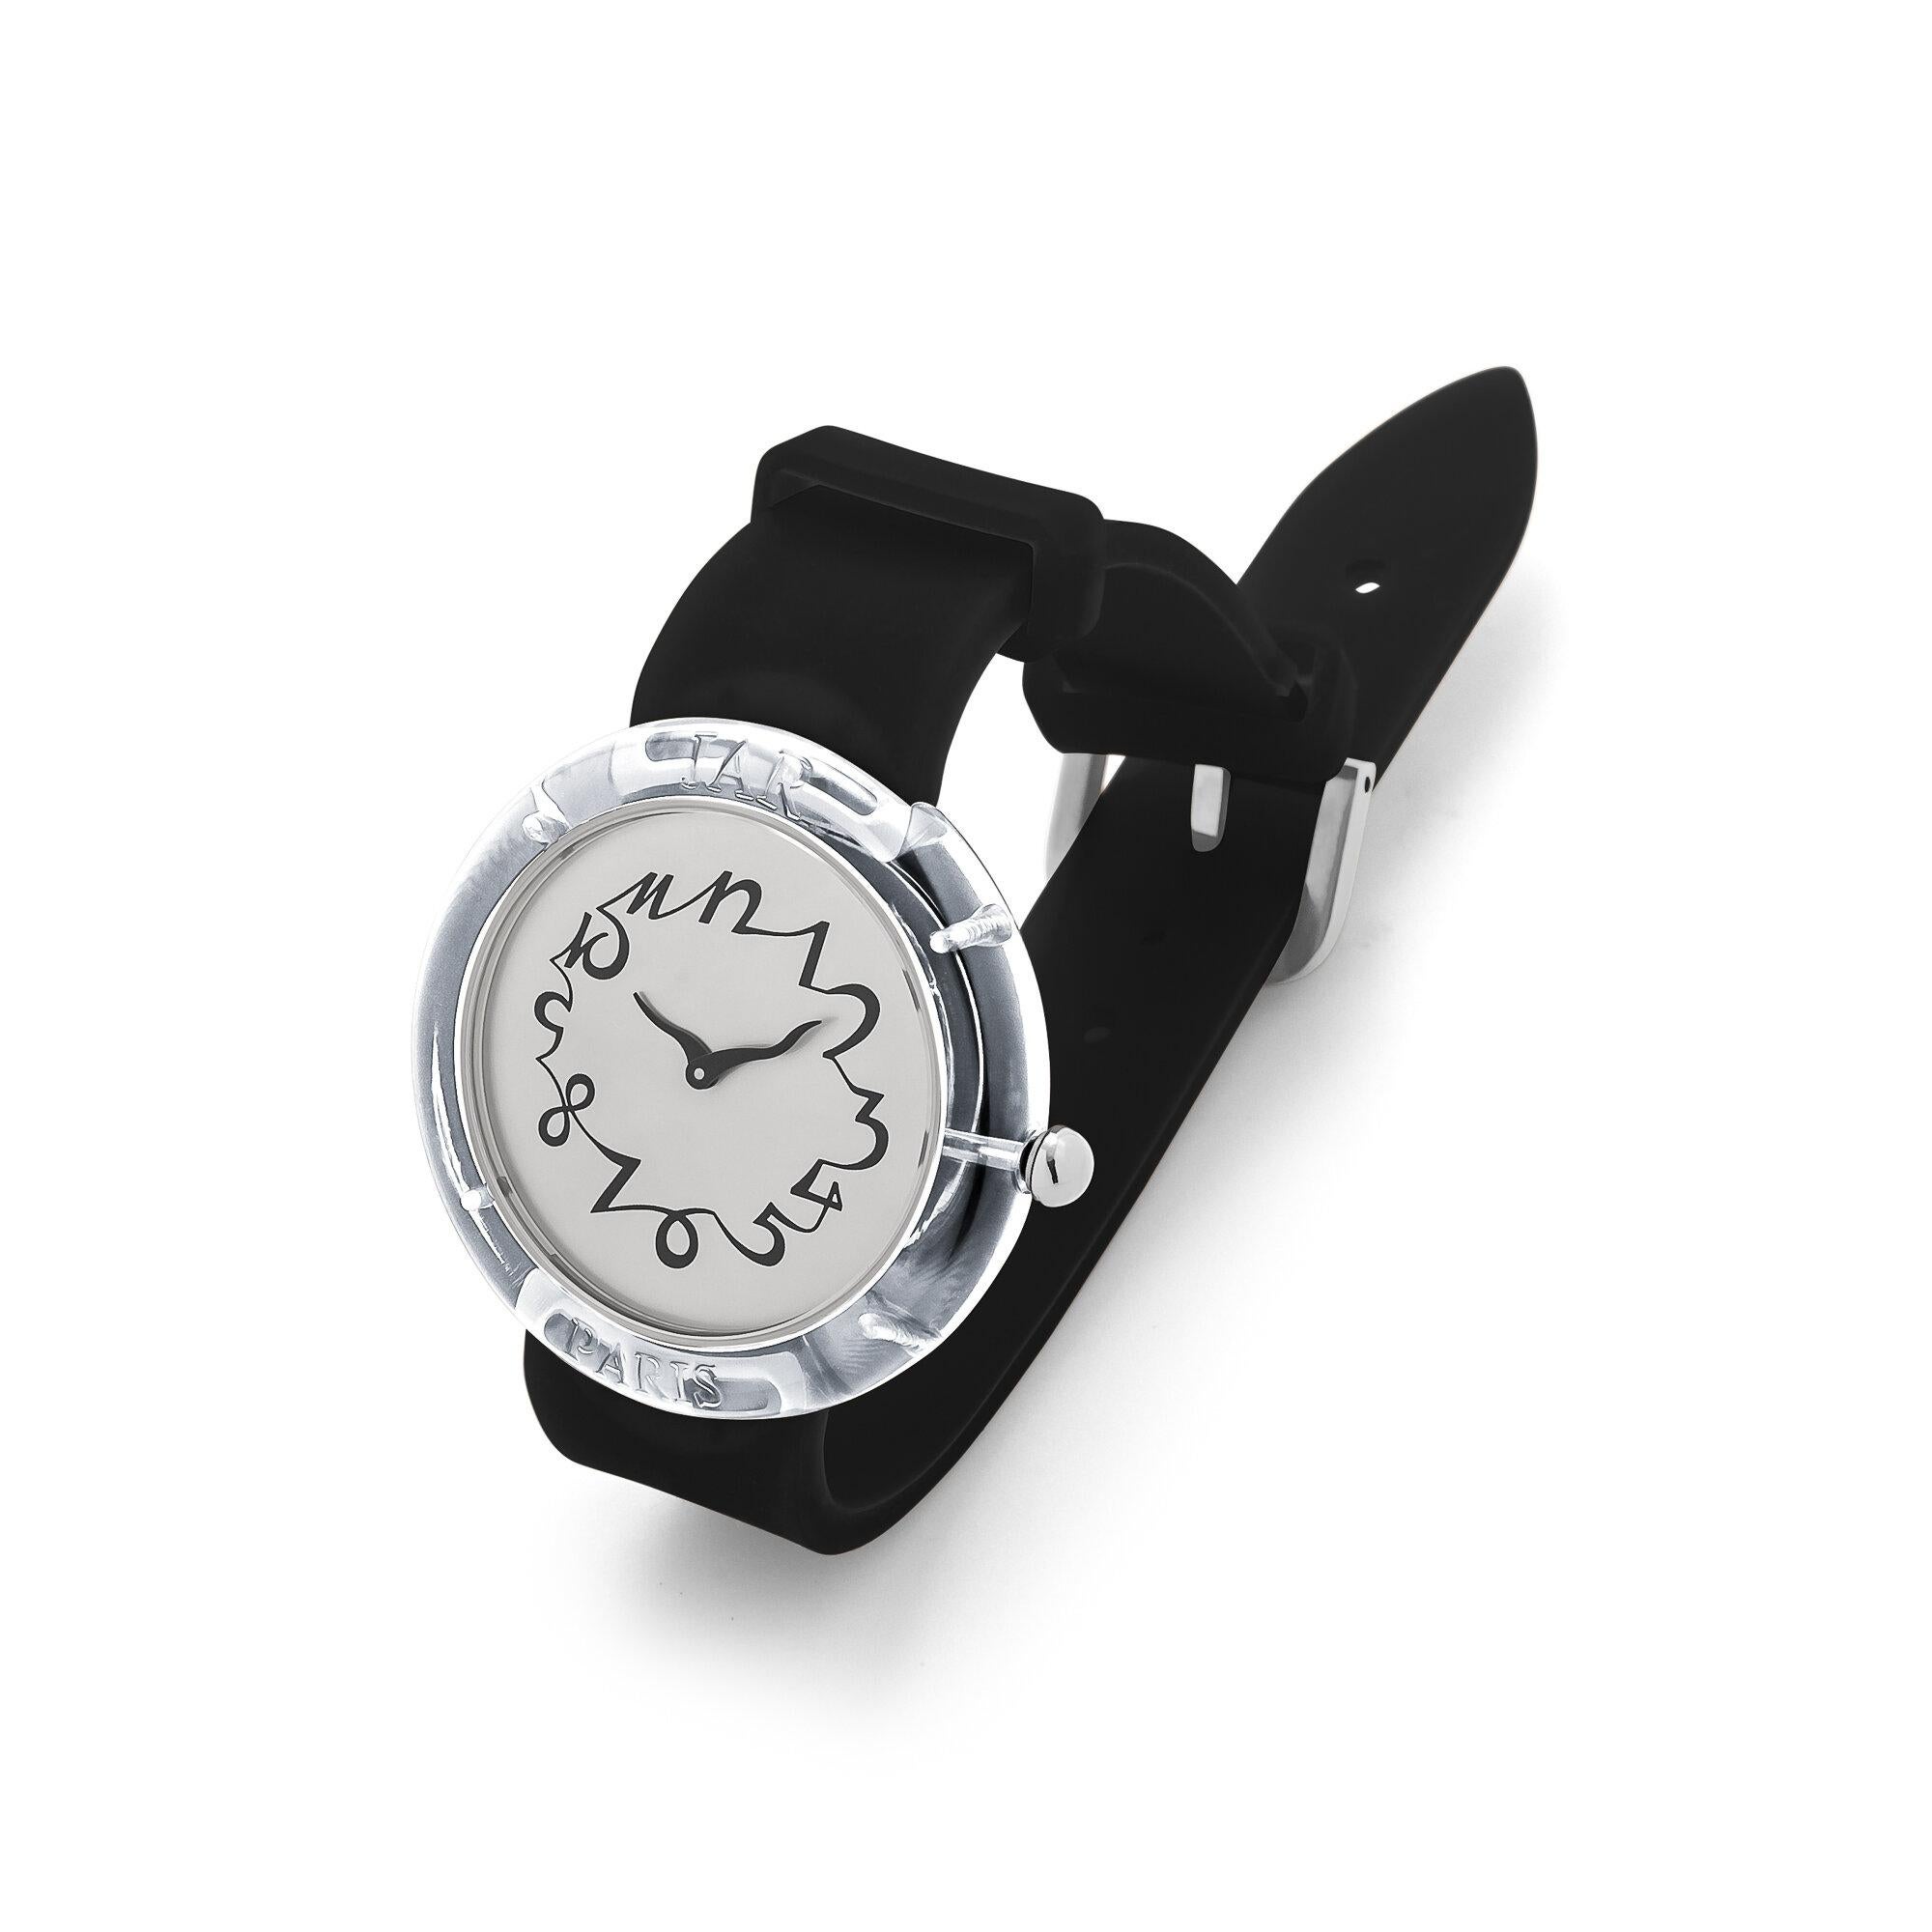 This JAR designed and collectible vintage watch from the Metropolitan Museum of Art collection is wearable fine art.  With a chic black silicone watch strap, a silver face, and a clear perspex bezel, this watch is sleek and masterfully designed.